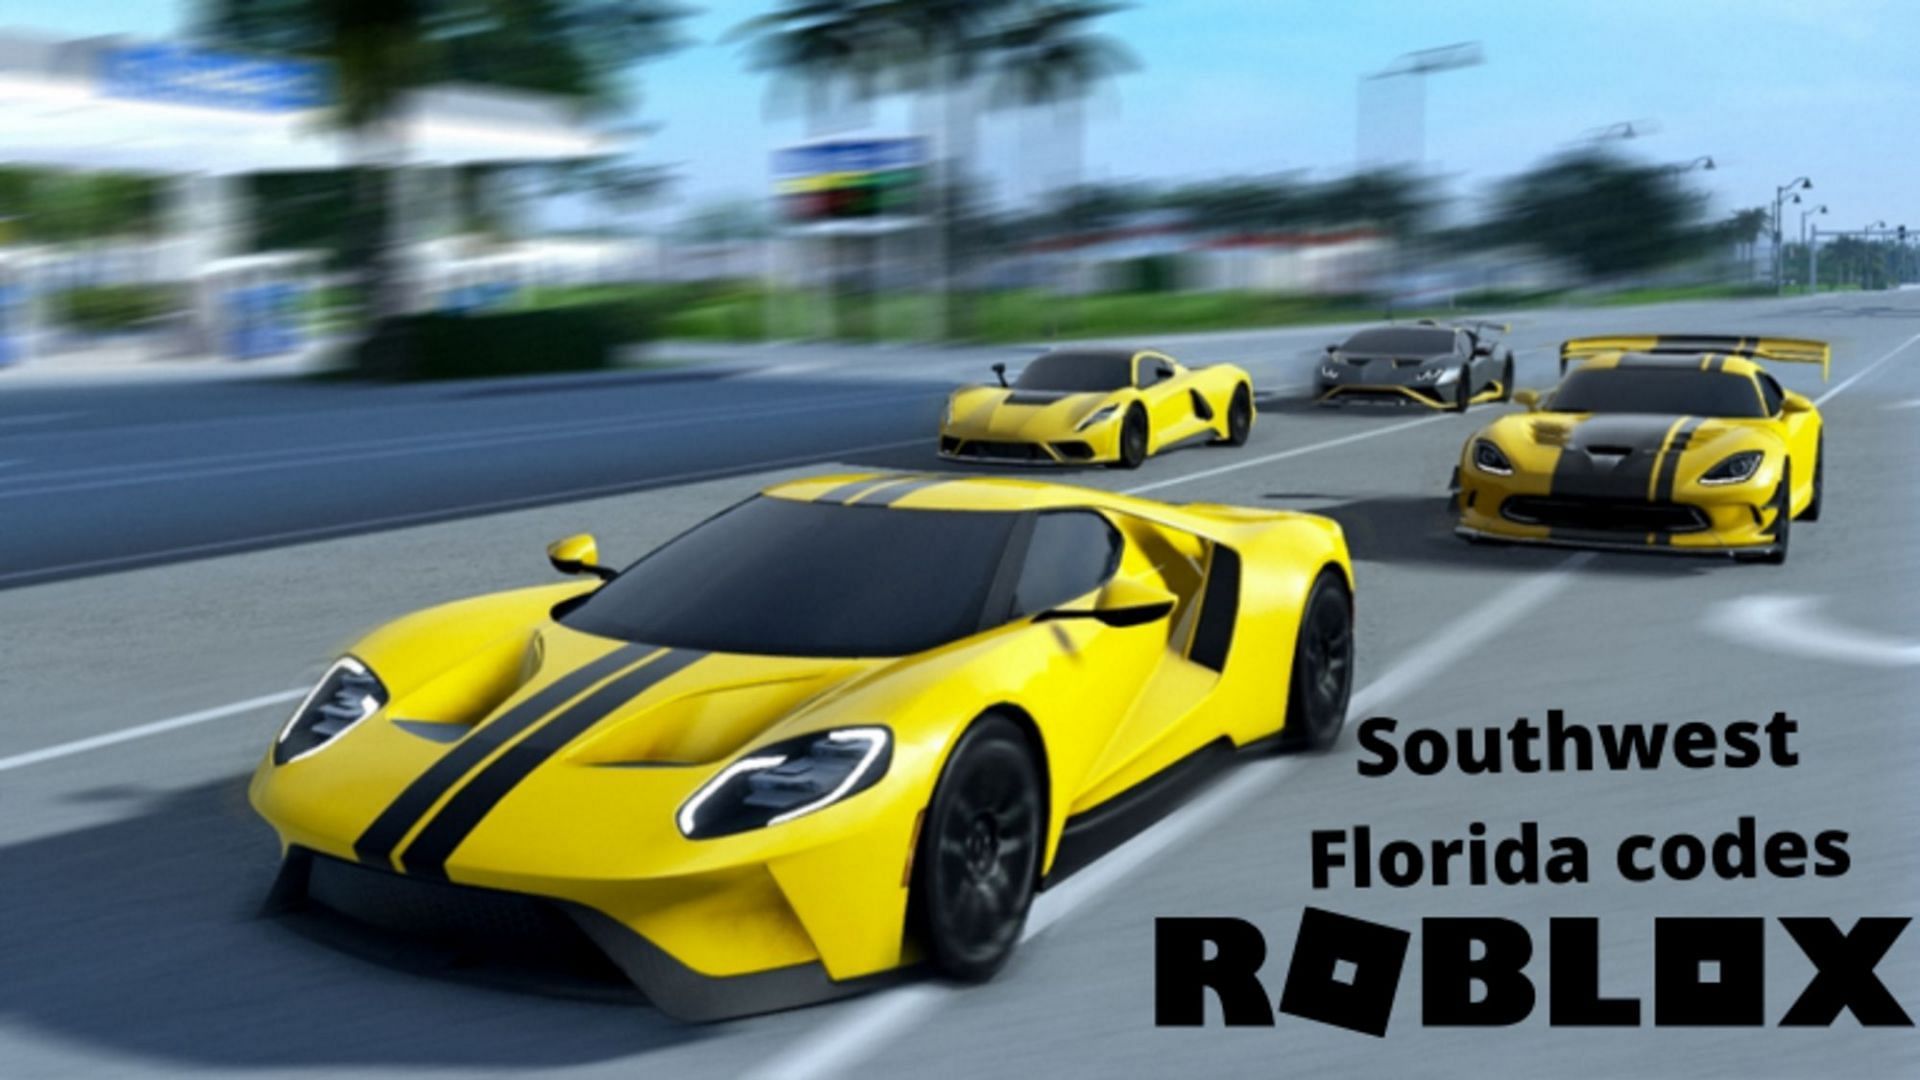 Roblox codes to redeem free cash in Southwest Florida (Image via Roblox)